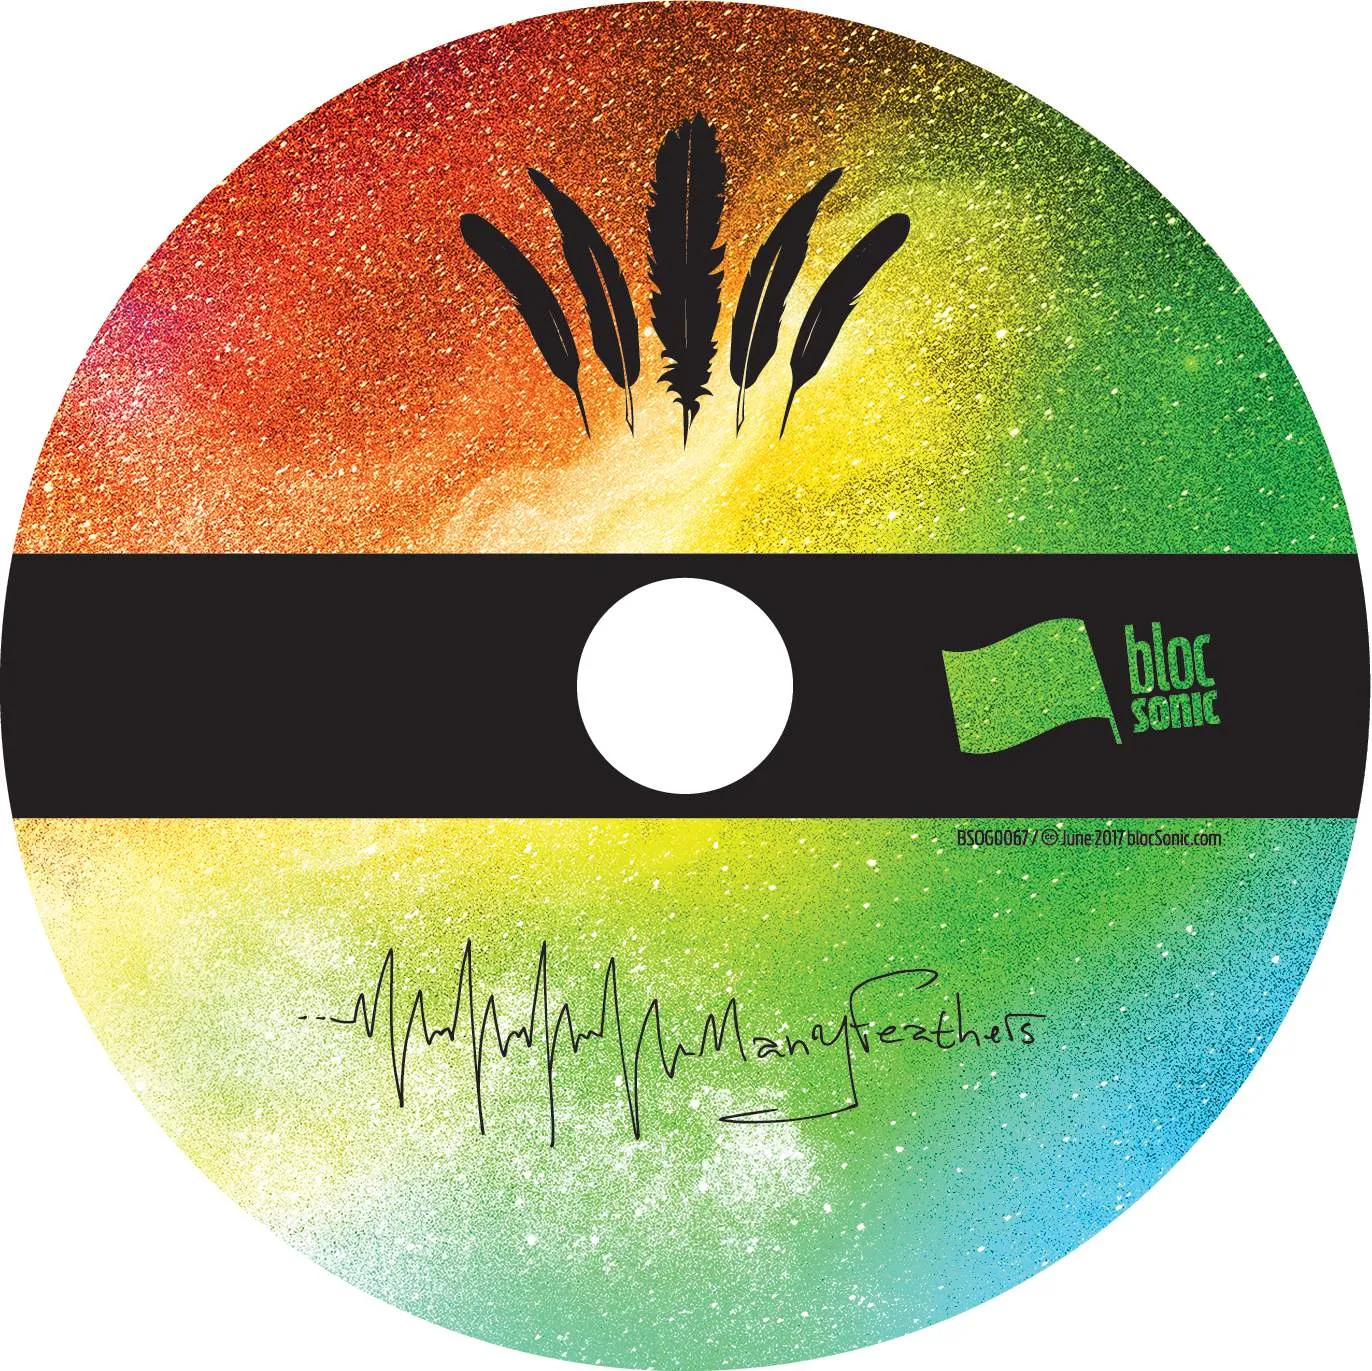 Album disc for “ManyFeathers” by ManyFeathers